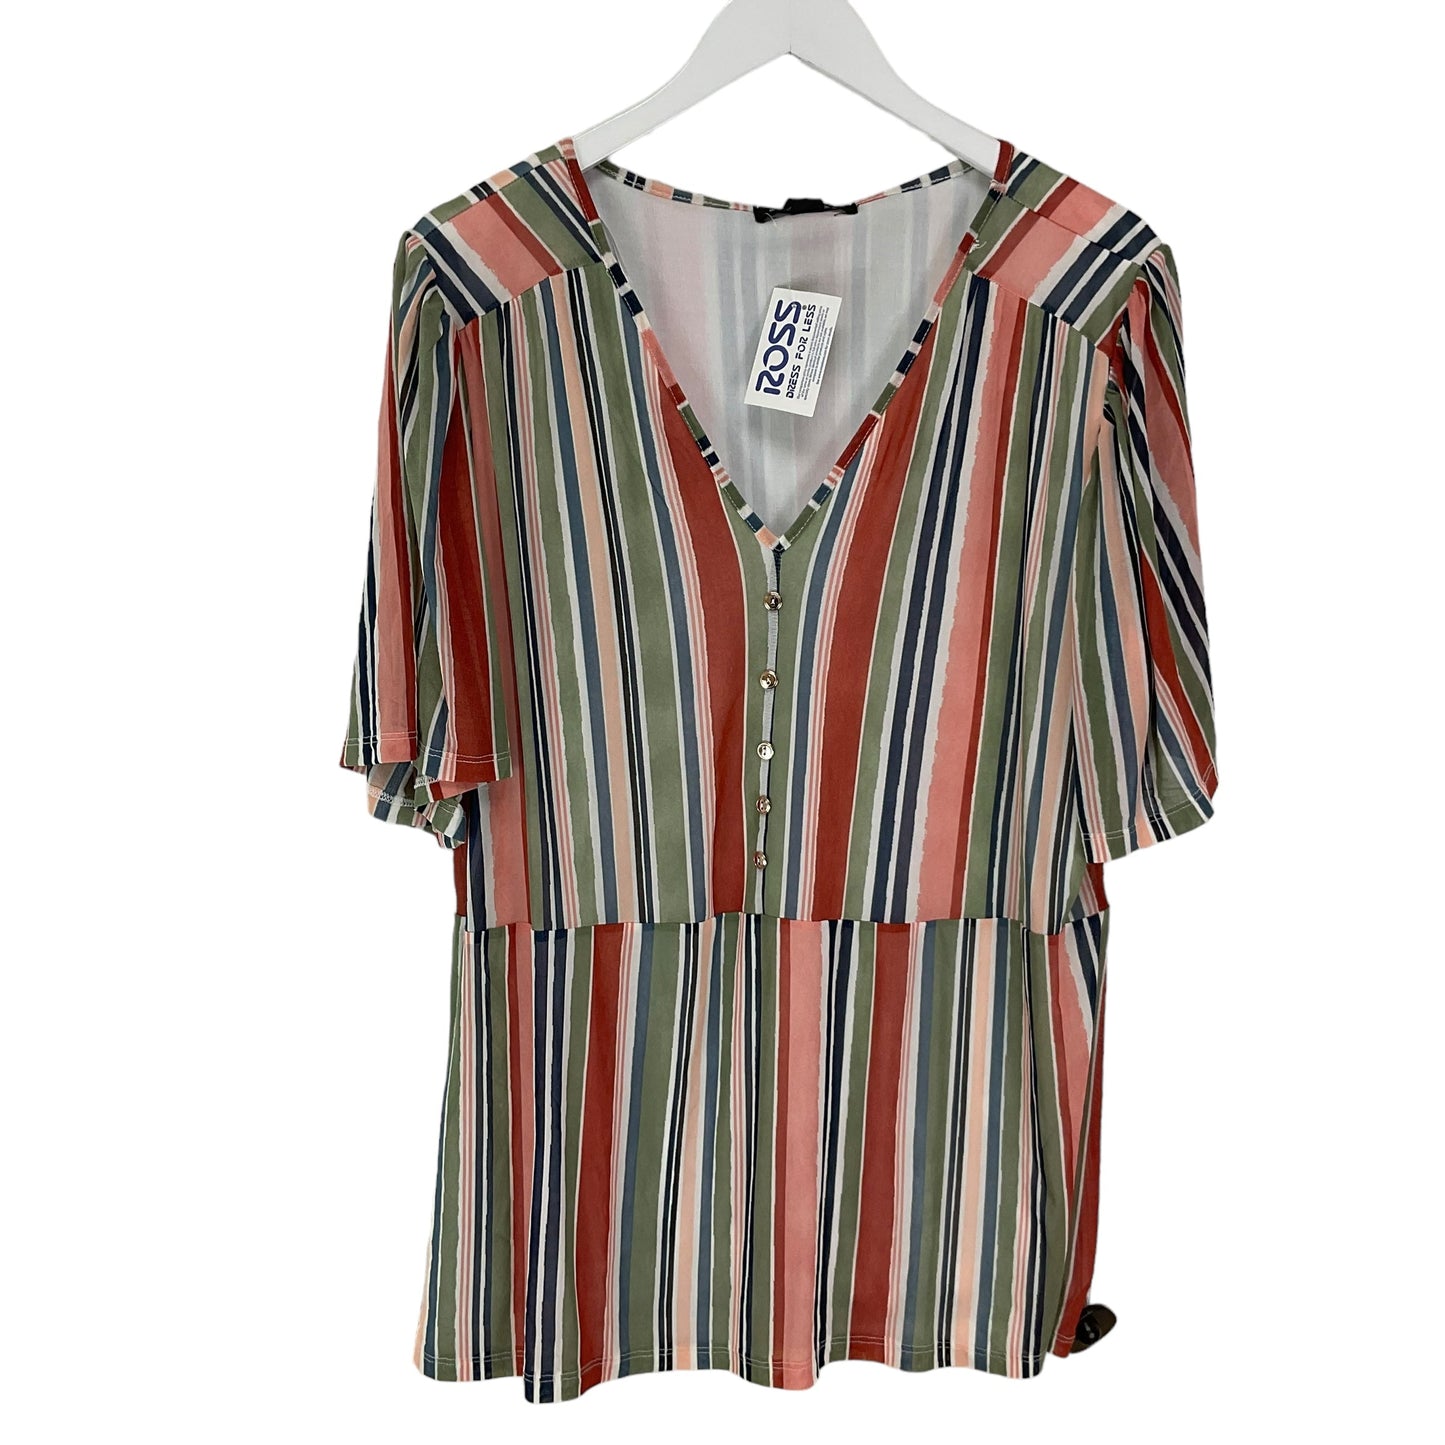 Multi-colored Top Short Sleeve Clothes Mentor, Size 1x